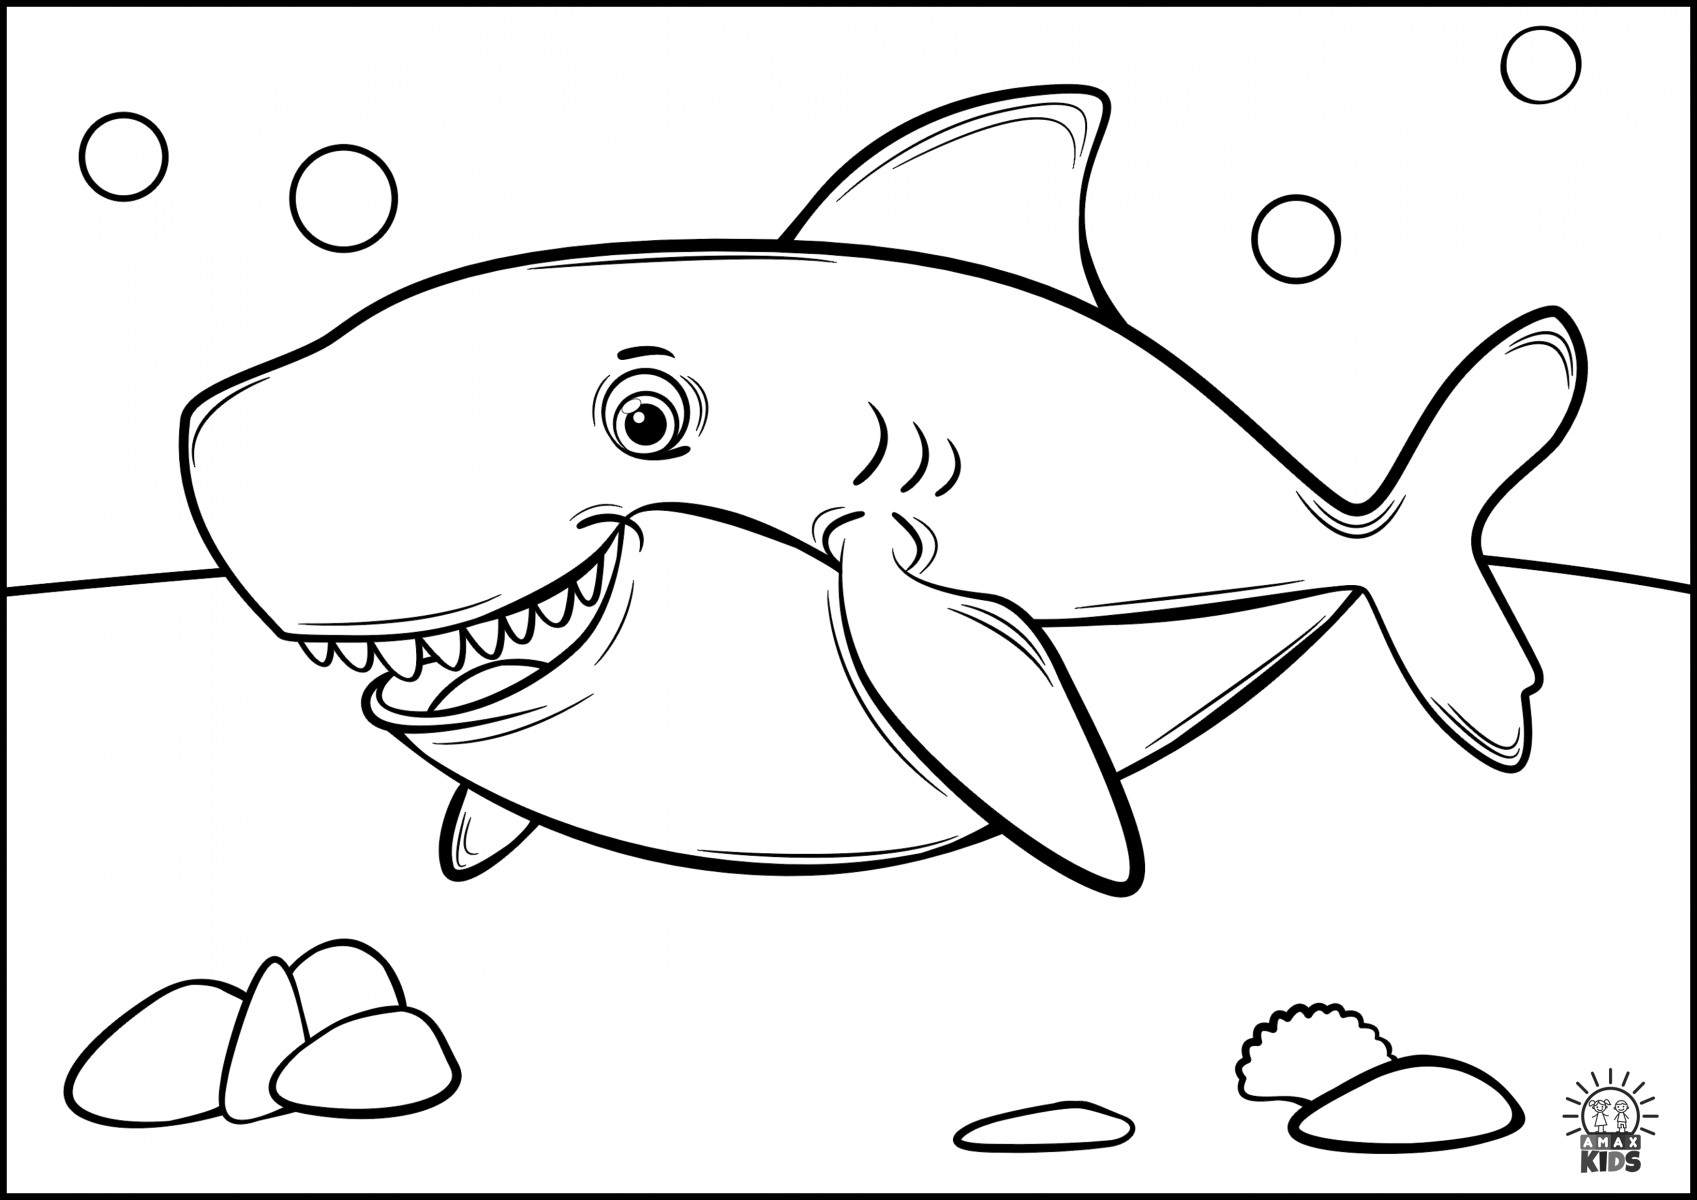 Printable coloring pages for kids – Sea creatures | Amax Kids